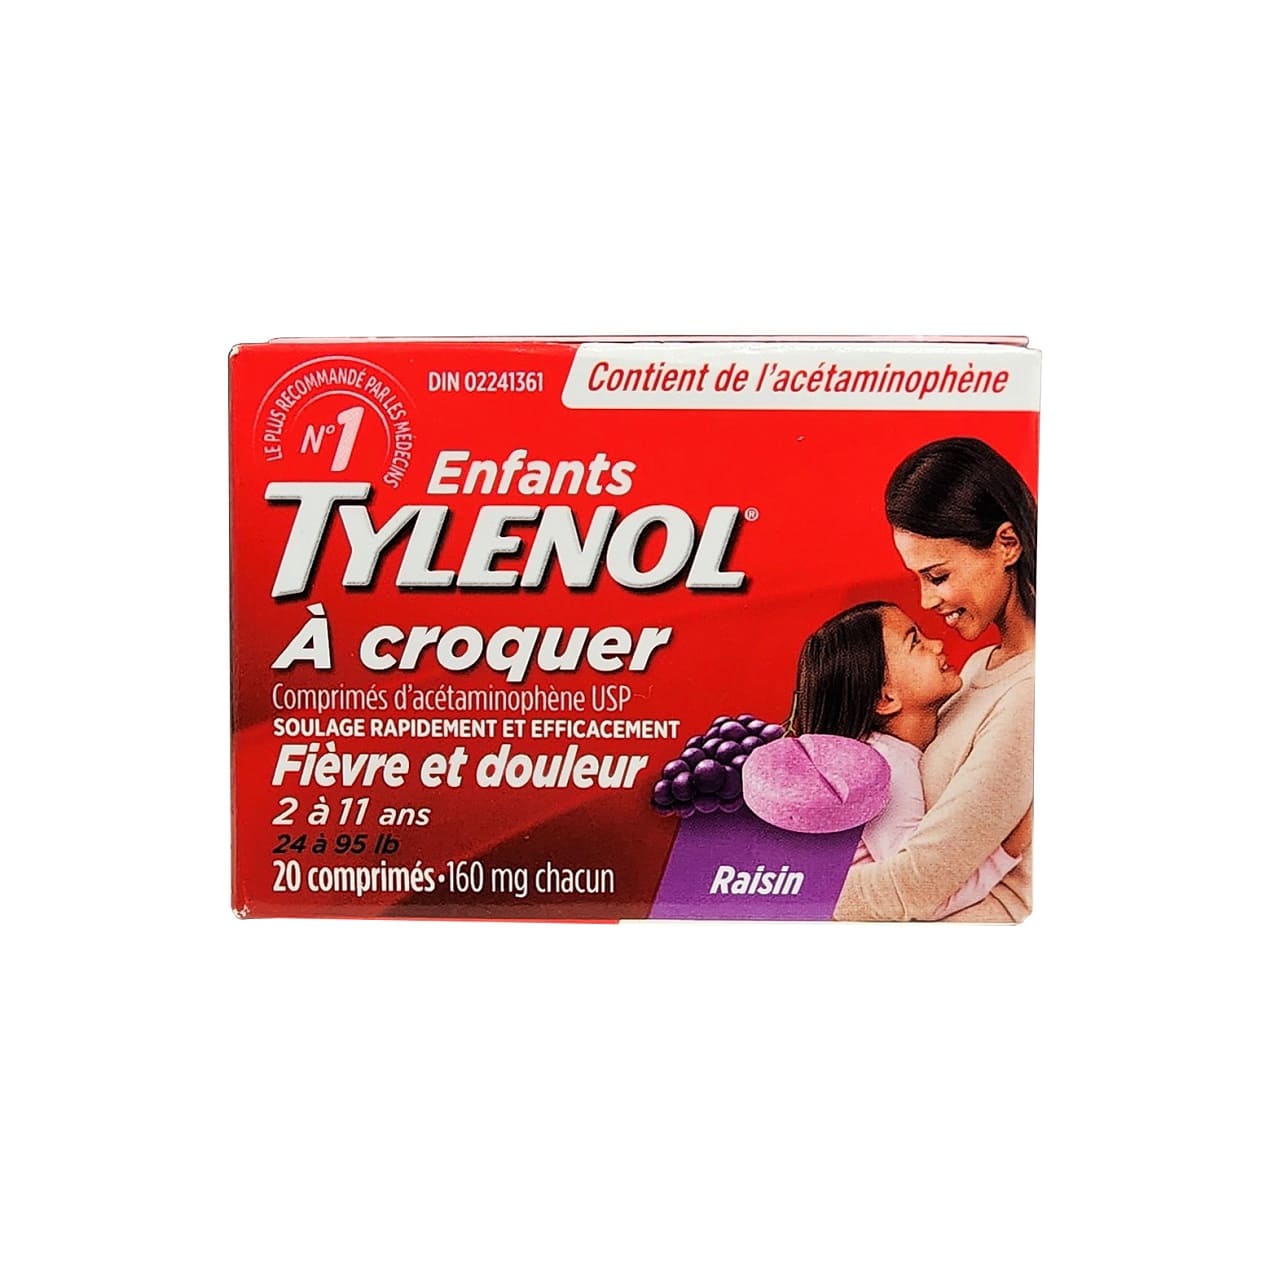 Product label for Children's Tylenol Acetaminophen Fever and Pain Chewables Grape (Ages 2-11) (20 tablets) in French